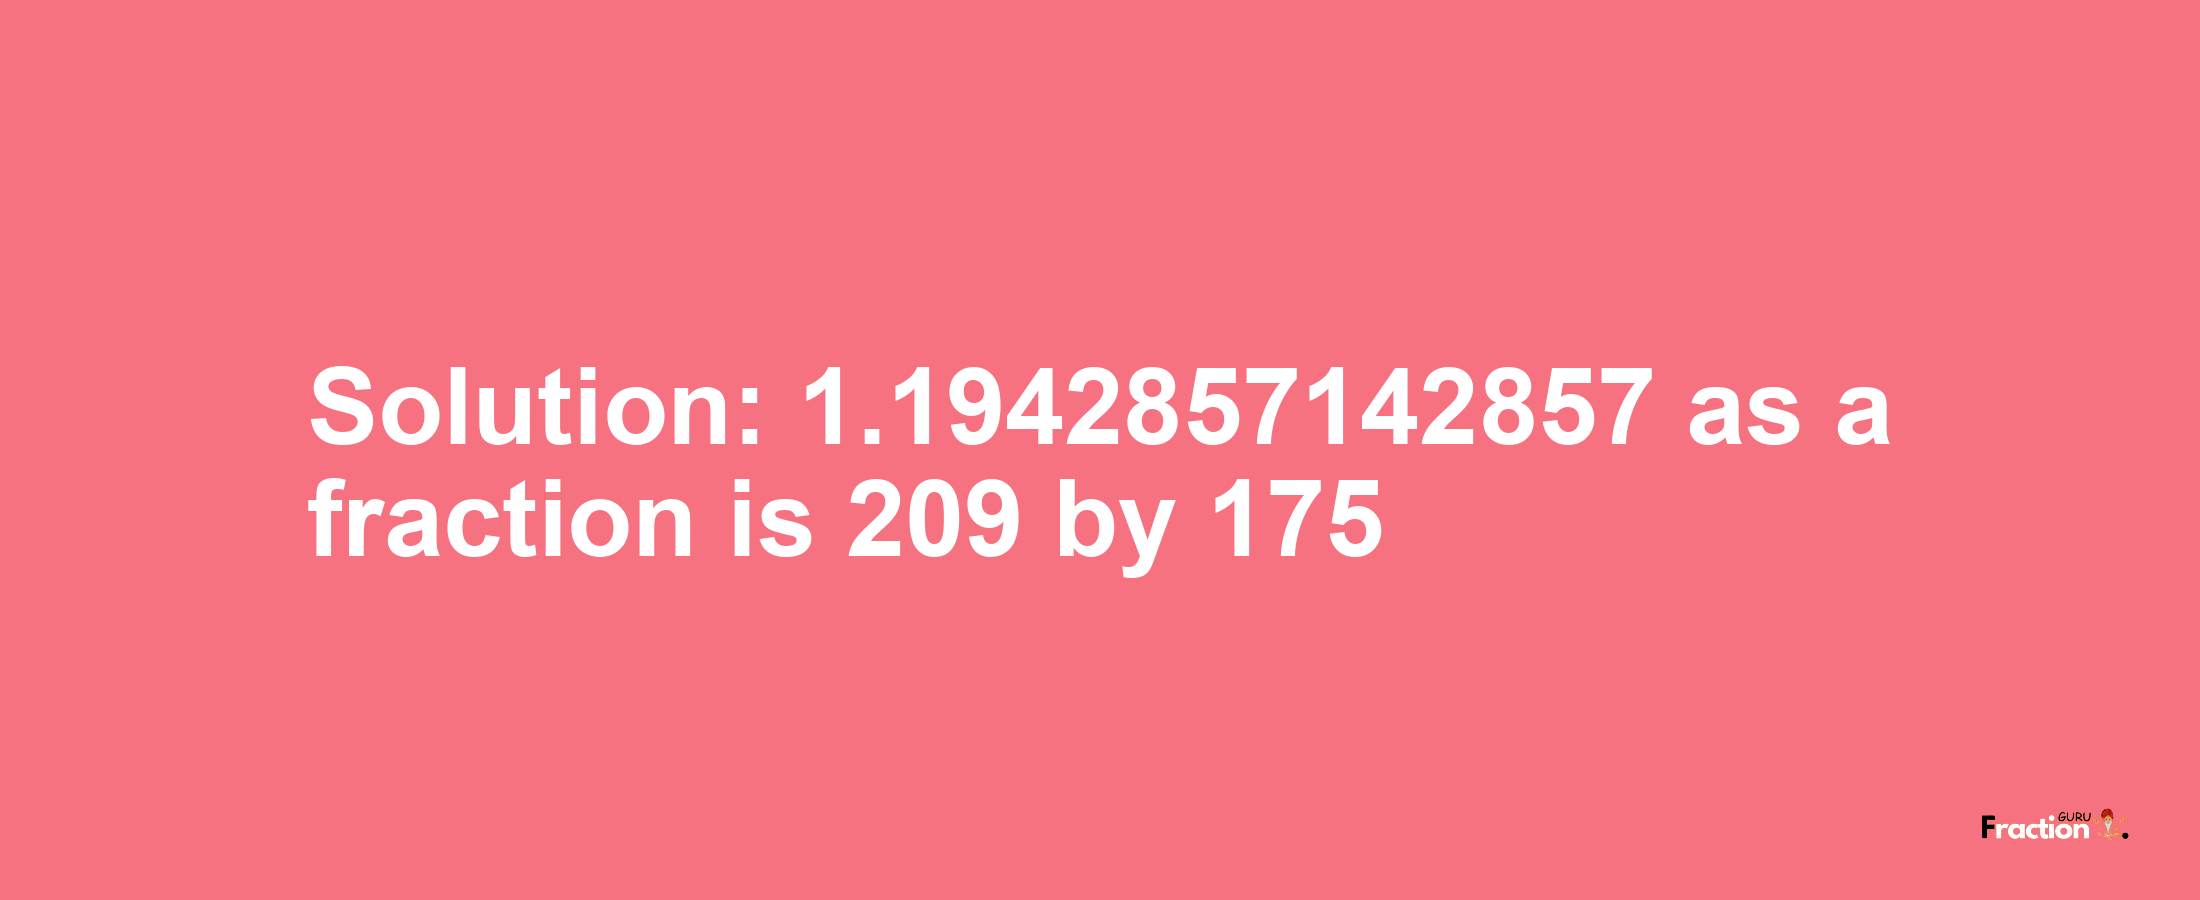 Solution:1.1942857142857 as a fraction is 209/175